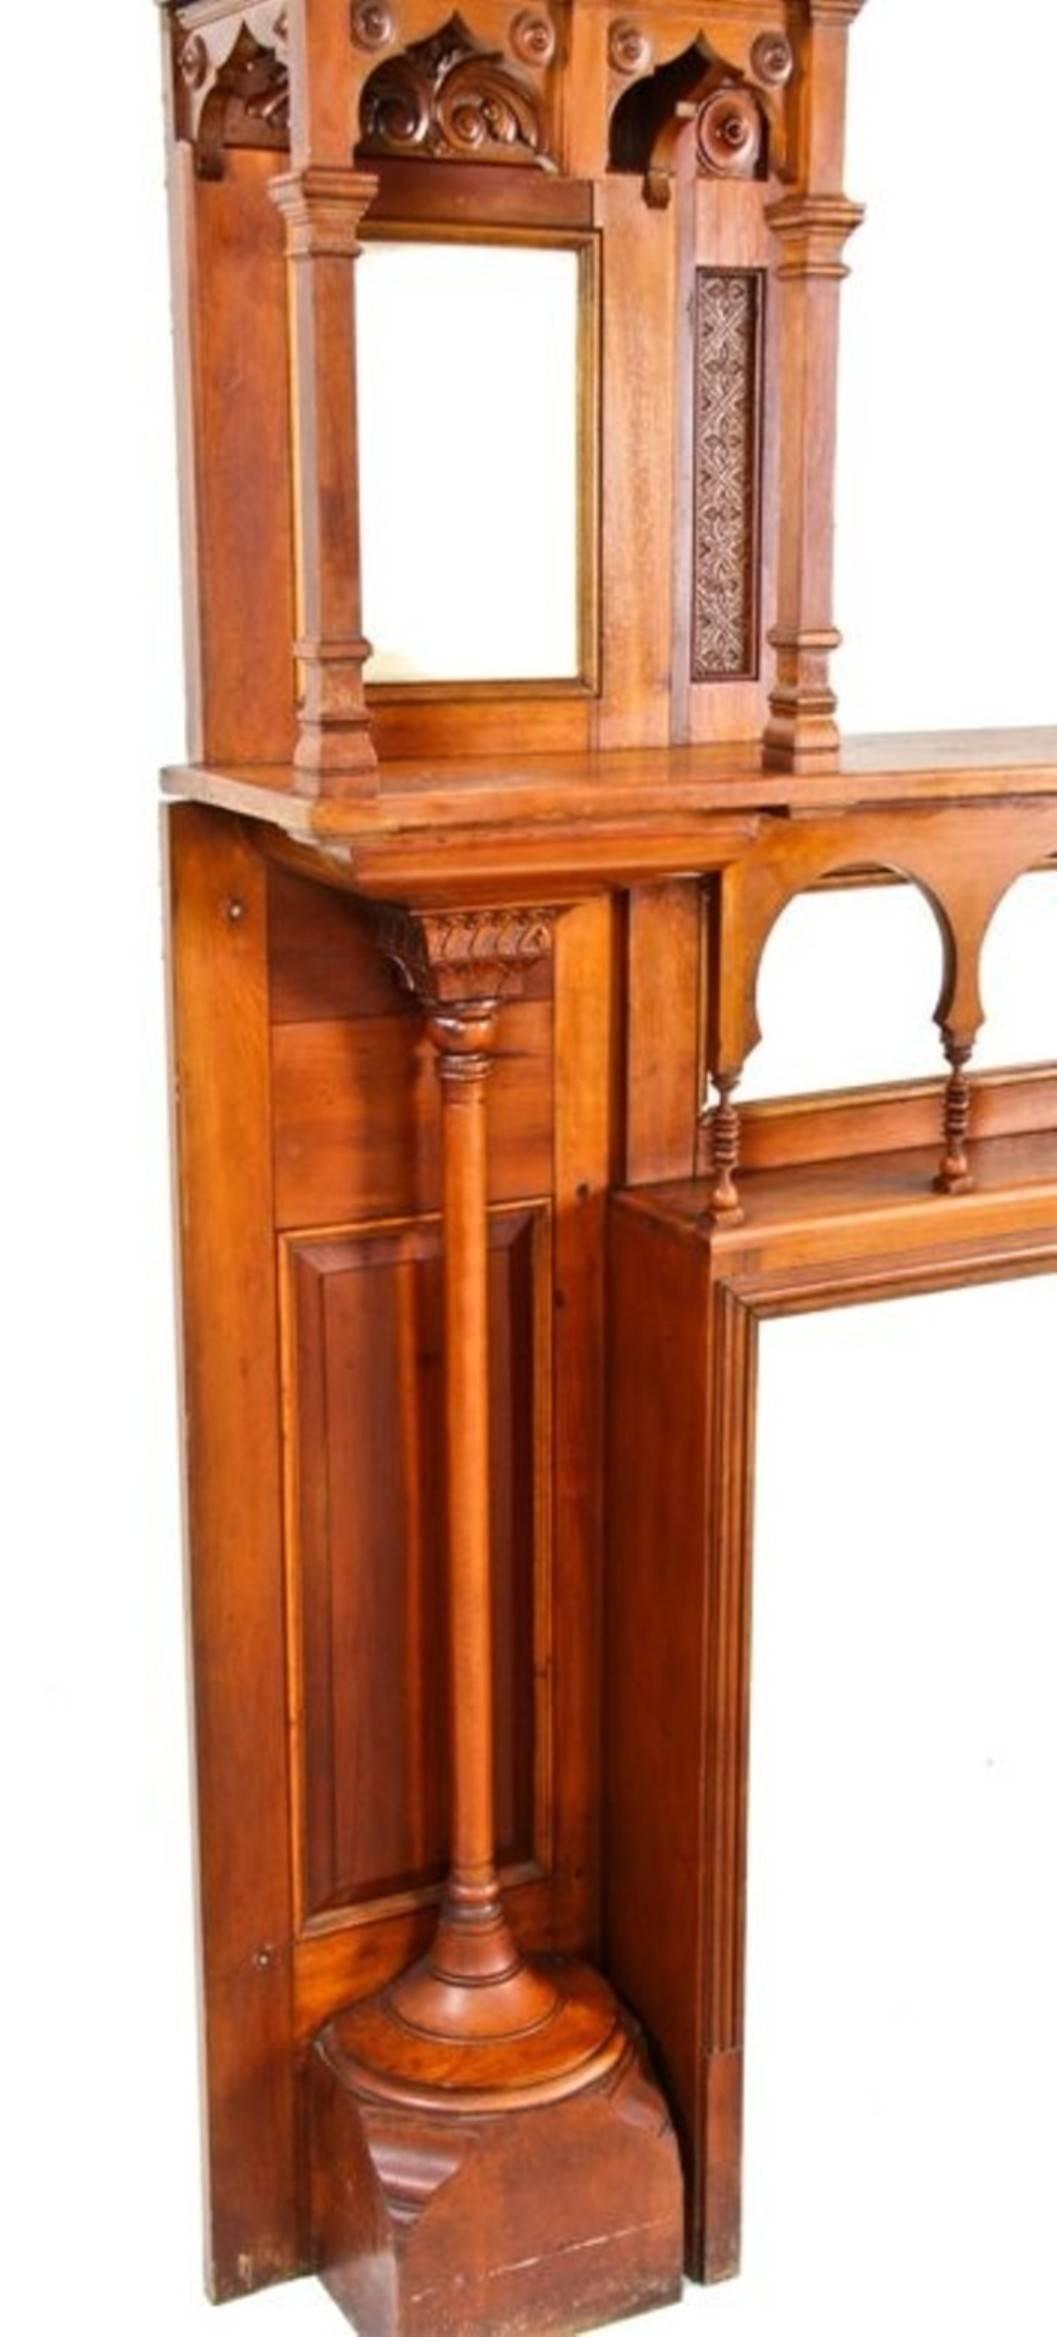 American 19th Century Cherry Wood Interior Mantel from the Cook Mansion